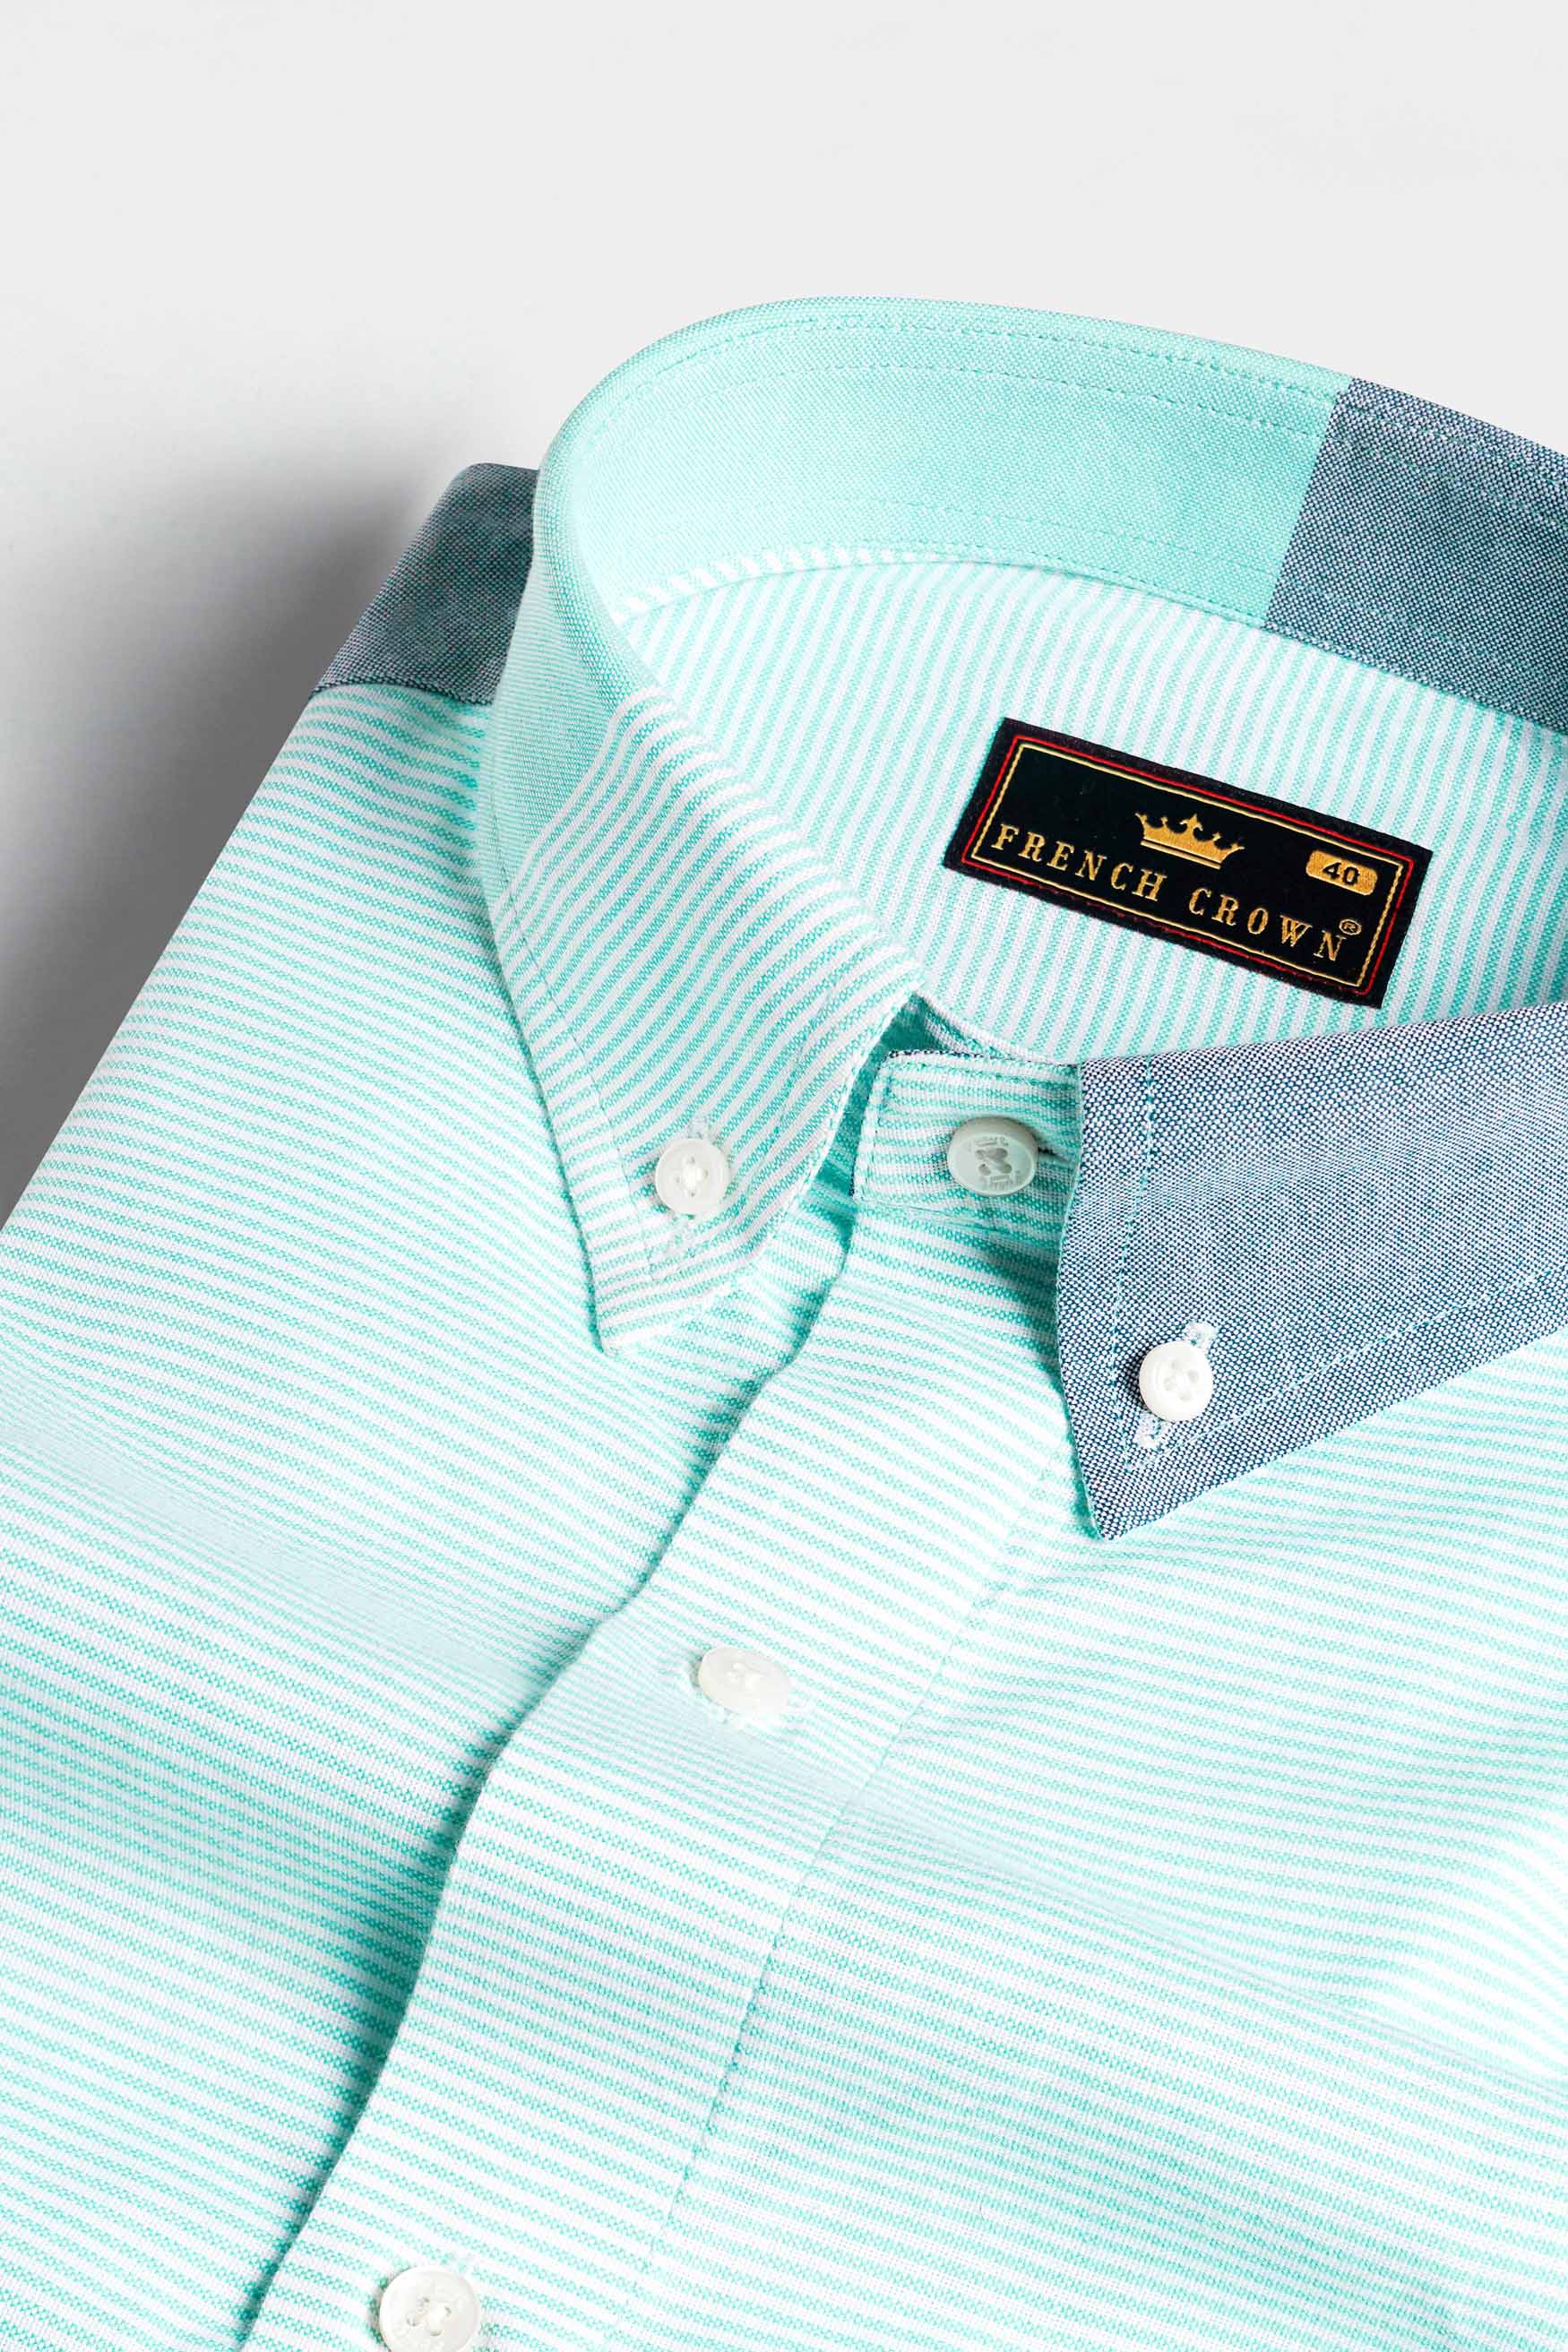 Frosted Mint Green and Neptune Gray Striped with Hand Painted Royal Oxford Designer Shirt 6266-BD-ART-38, 6266-BD-ART-H-38, 6266-BD-ART-39, 6266-BD-ART-H-39, 6266-BD-ART-40, 6266-BD-ART-H-40, 6266-BD-ART-42, 6266-BD-ART-H-42, 6266-BD-ART-44, 6266-BD-ART-H-44, 6266-BD-ART-46, 6266-BD-ART-H-46, 6266-BD-ART-48, 6266-BD-ART-H-48, 6266-BD-ART-50, 6266-BD-ART-H-50, 6266-BD-ART-52, 6266-BD-ART-H-52